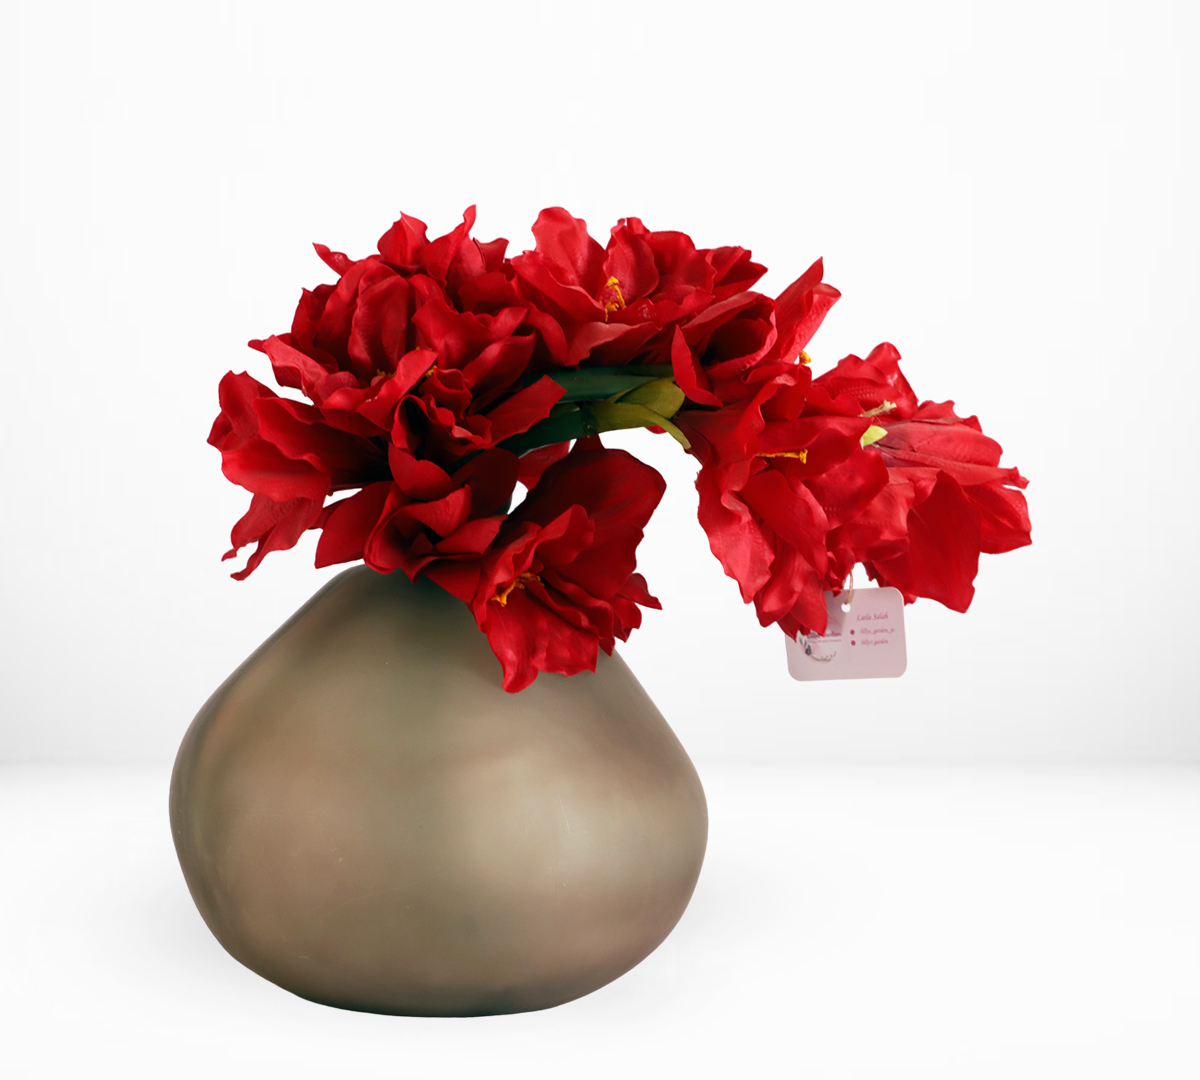 Decorative Glass Vase Filled with Artificial Flowers - Hand Arranged